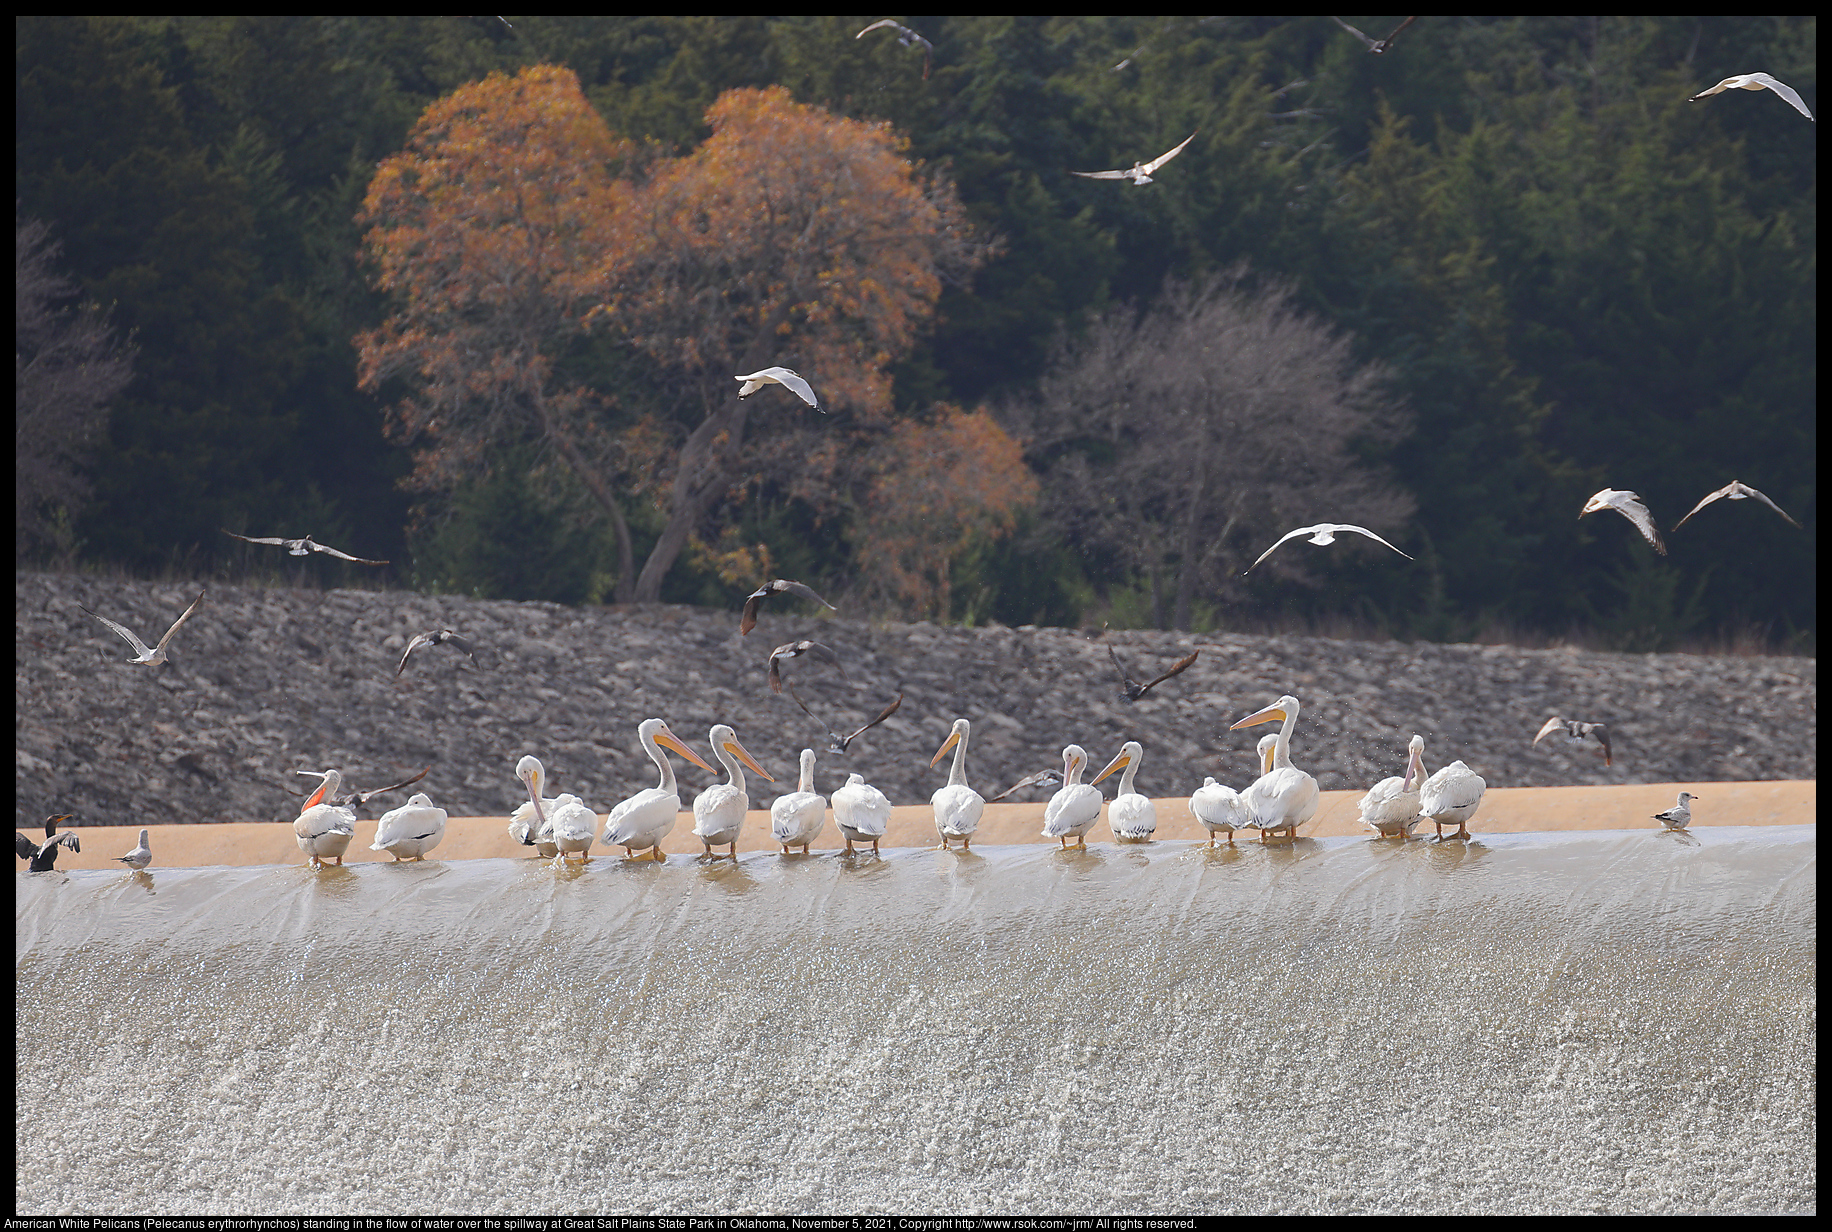 American White Pelicans (Pelecanus erythrorhynchos) standing in the flow of water over the spillway at Great Salt Plains State Park in Oklahoma, November 5, 2021